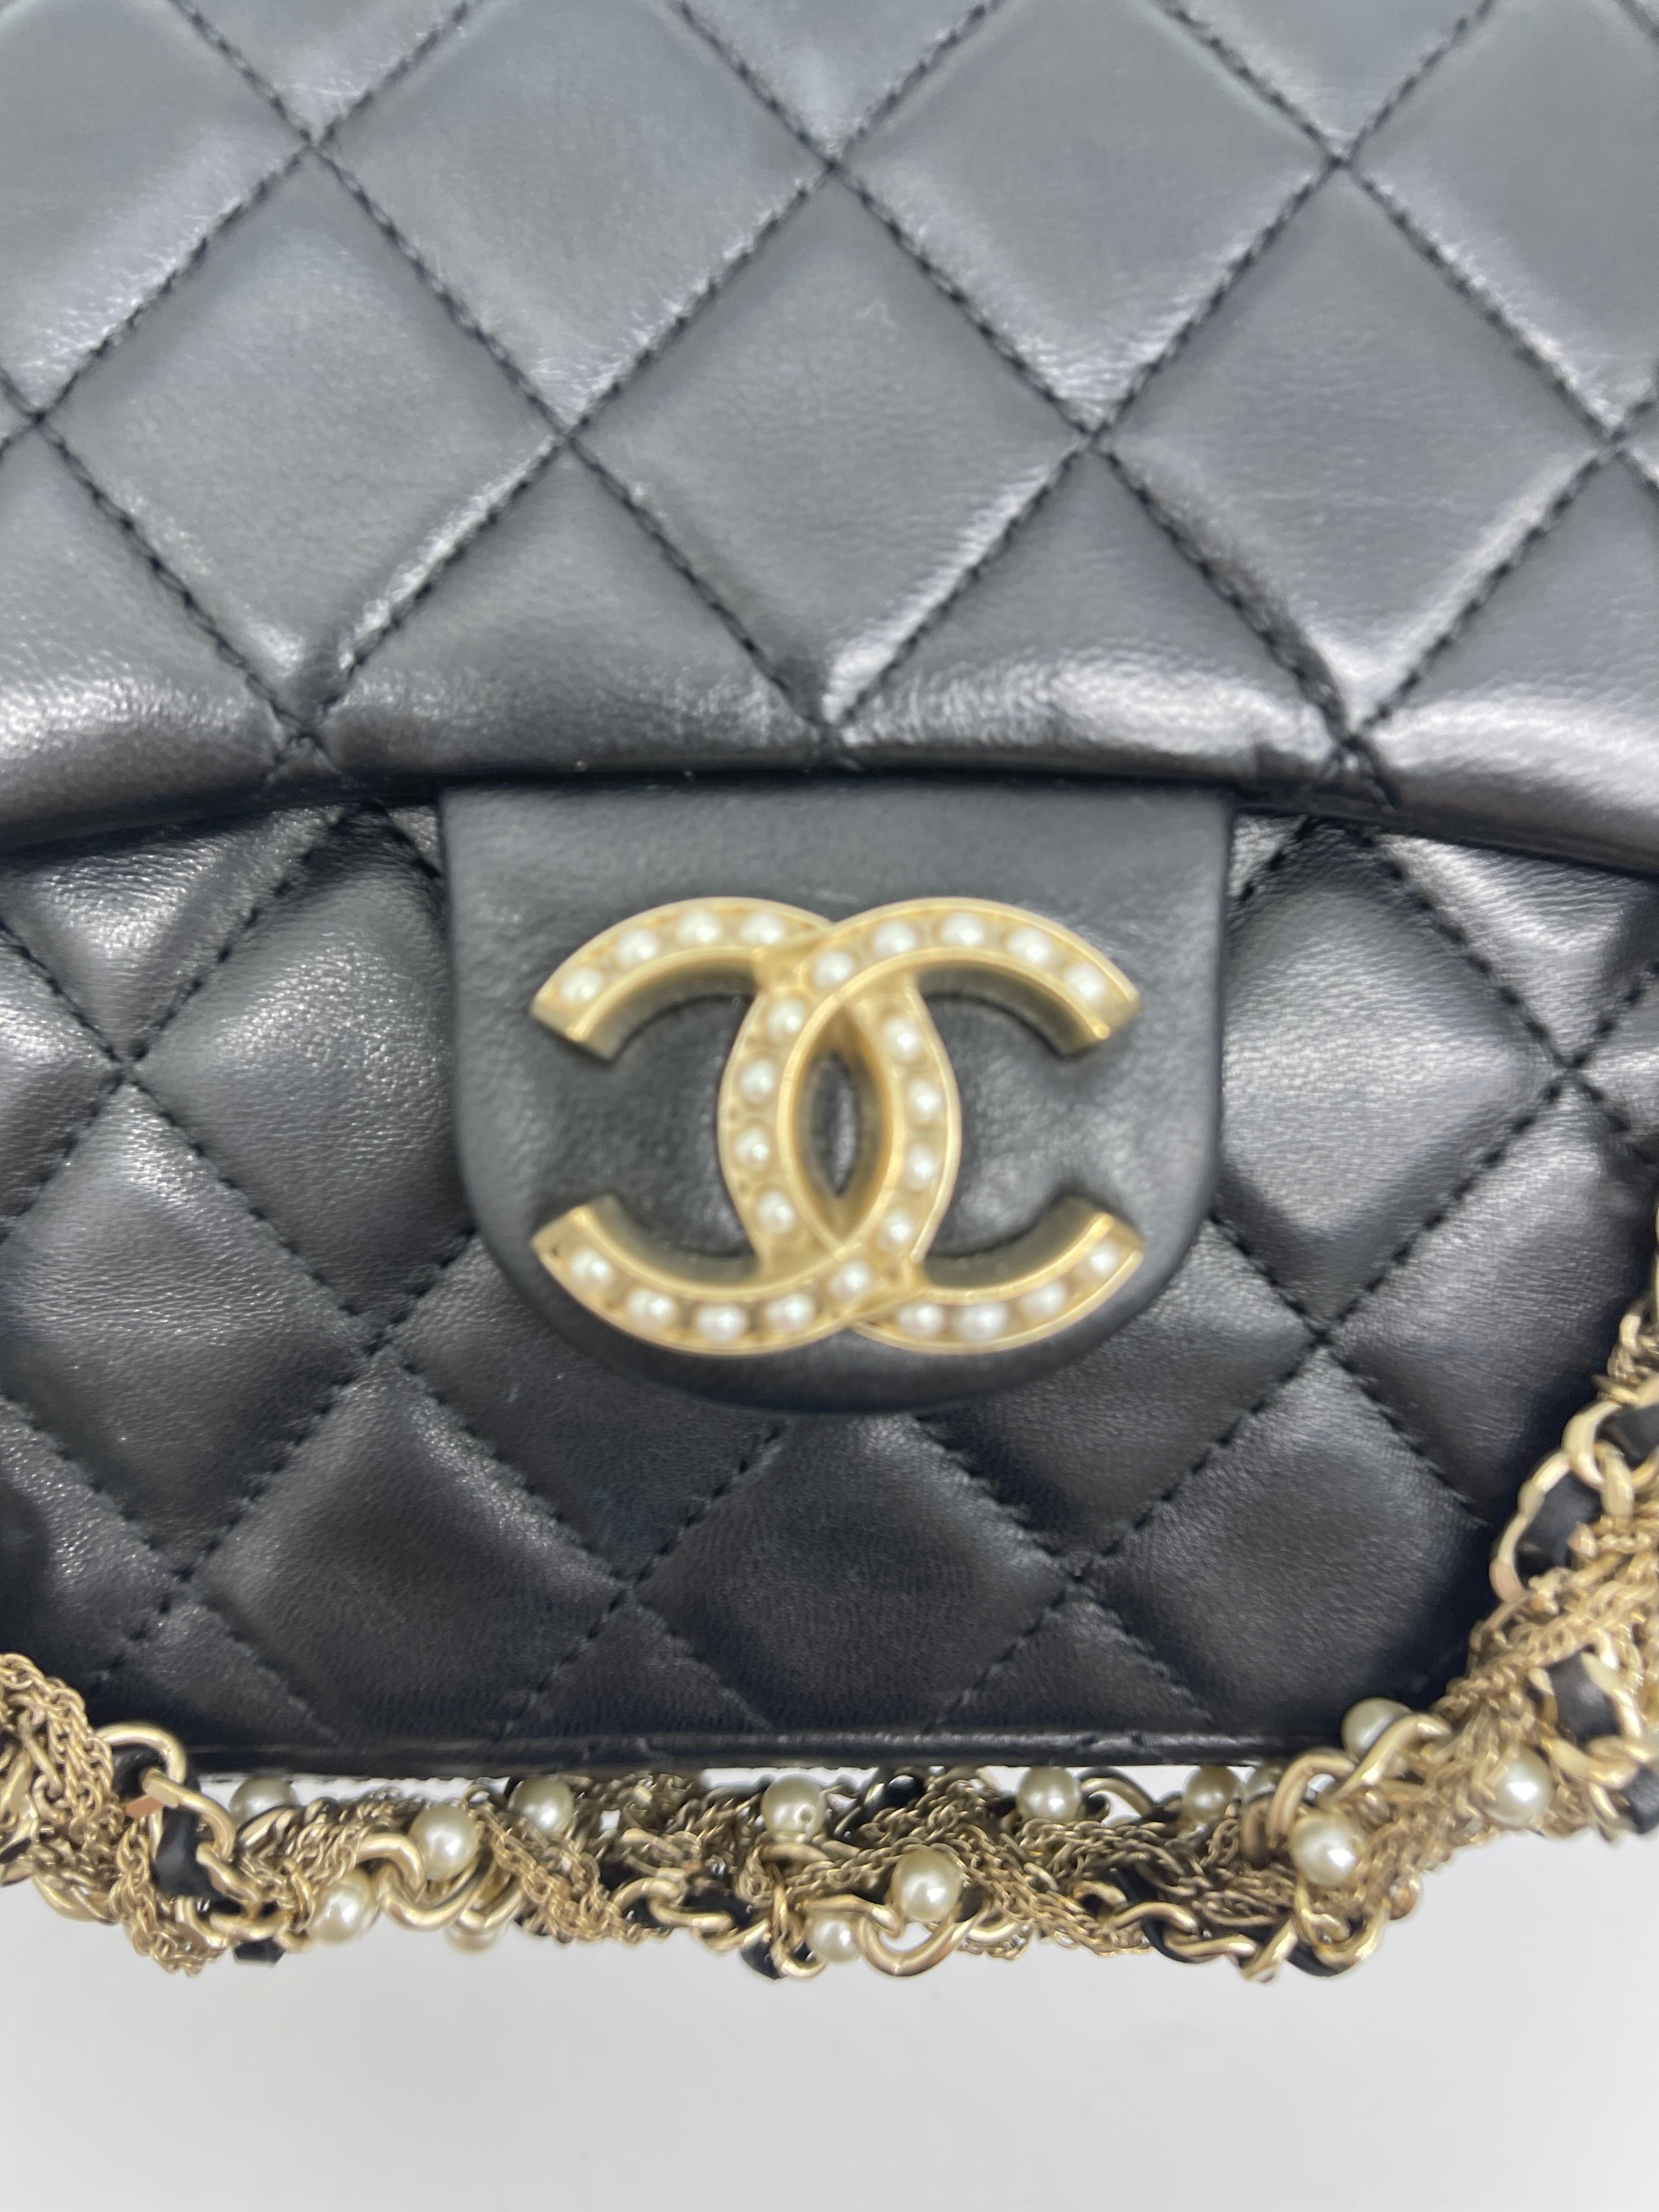 What a stunning beauty..! This Chanel Westminster Pearl Flap Bag in black lambskin, embellished with gold pearl CC clasp opening is exquisite. The bag has an interwoven leather chain and pearl strap which is two-toned in gold and silver. A beautiful